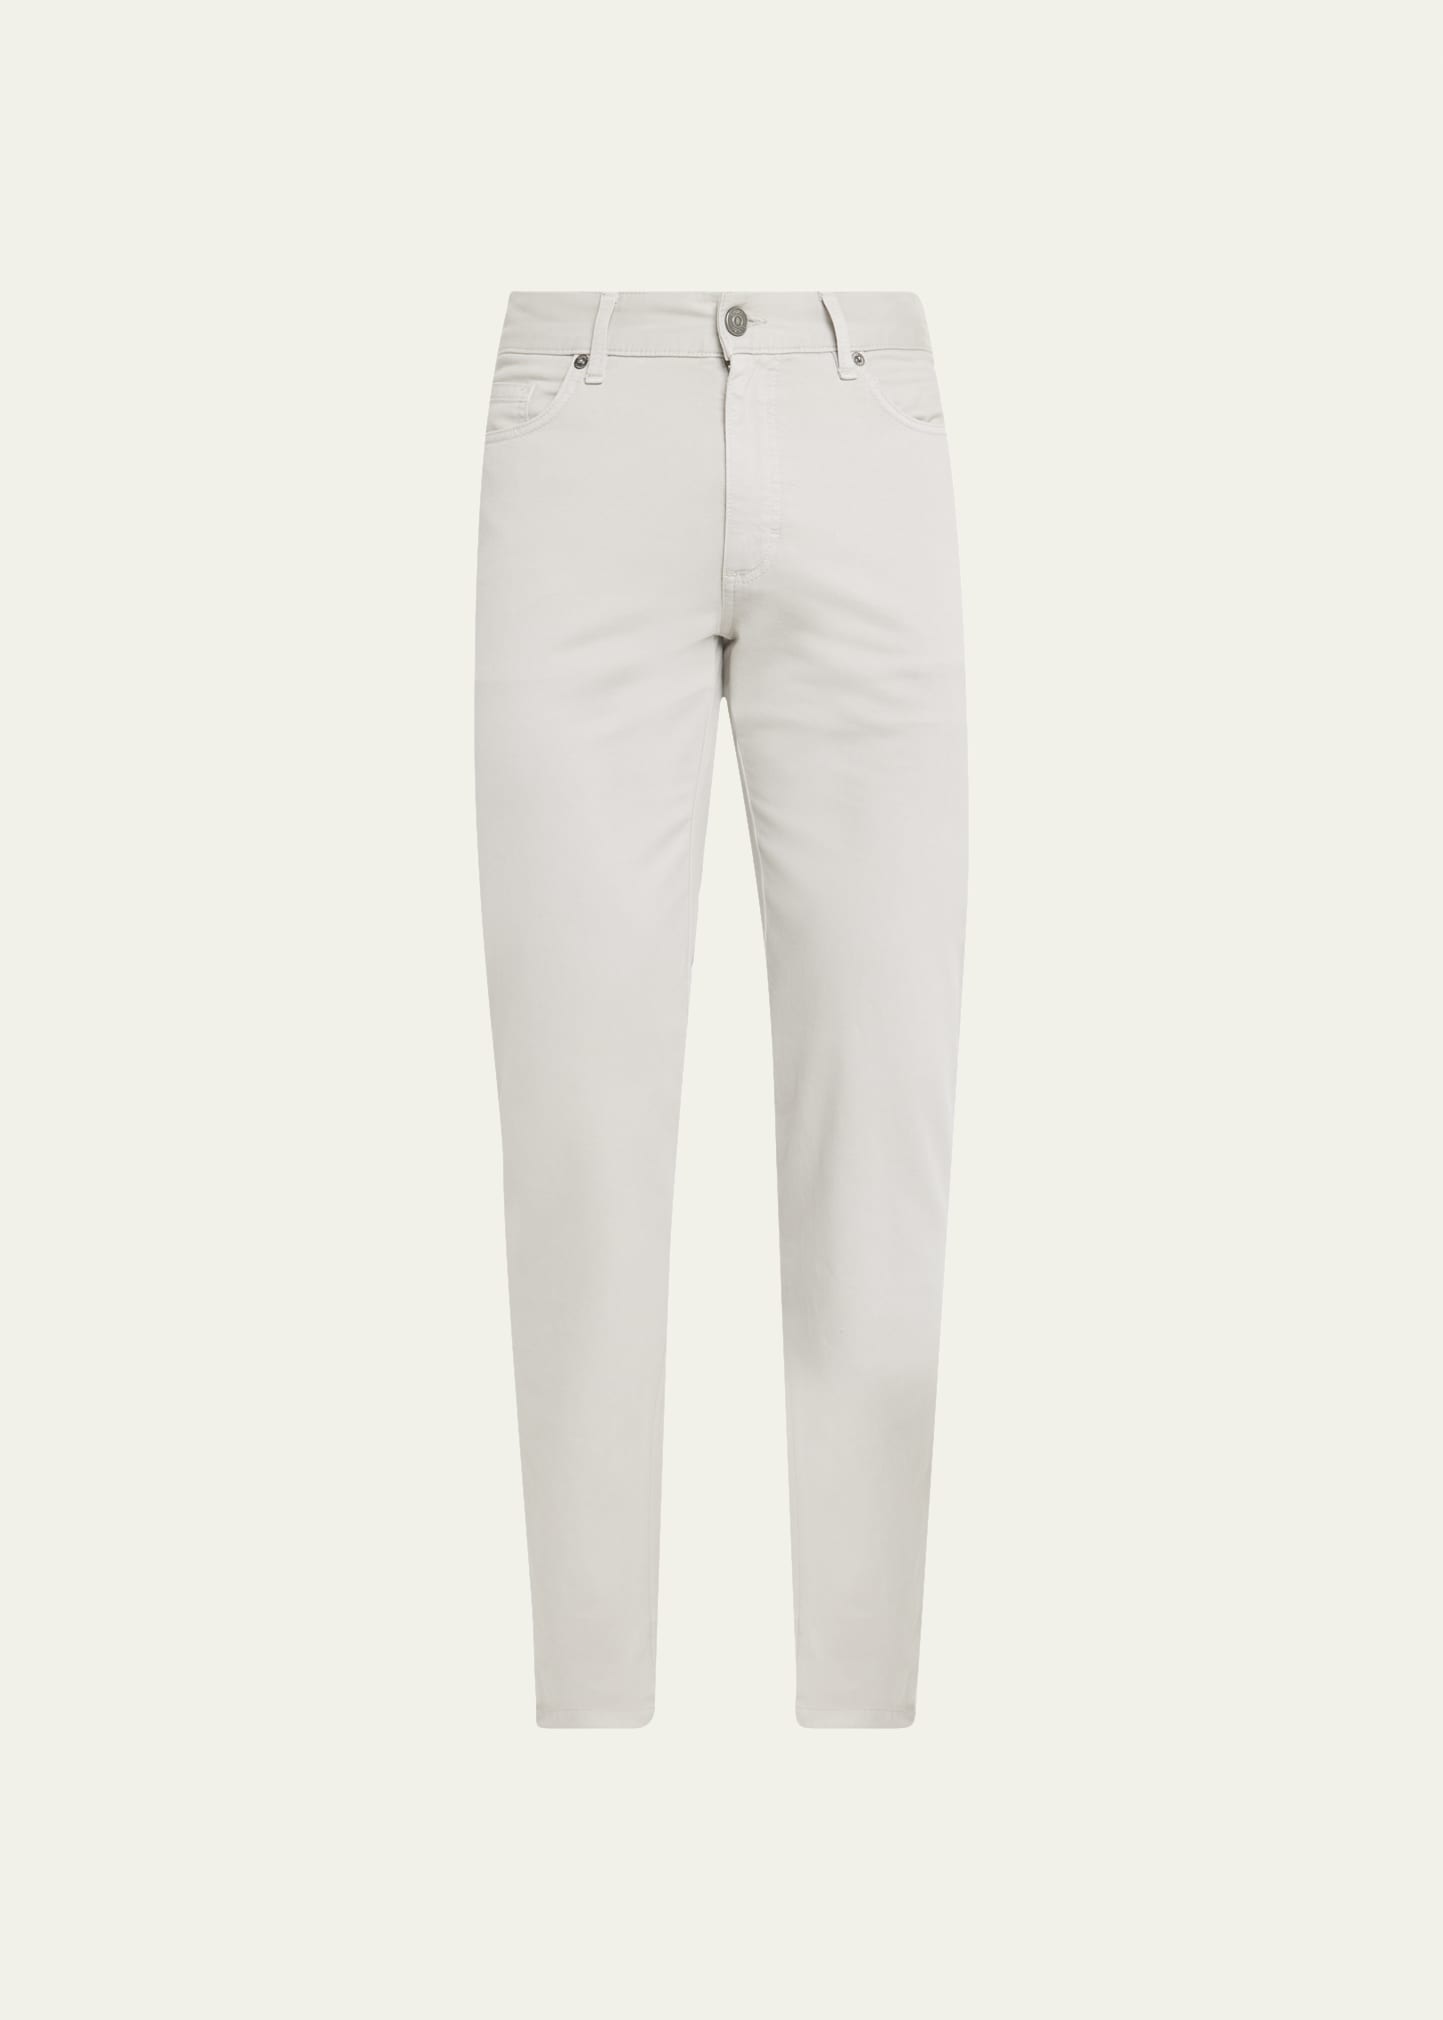 Zegna Classic Comfort Five-pocket Jeans In Lt Gry Sld